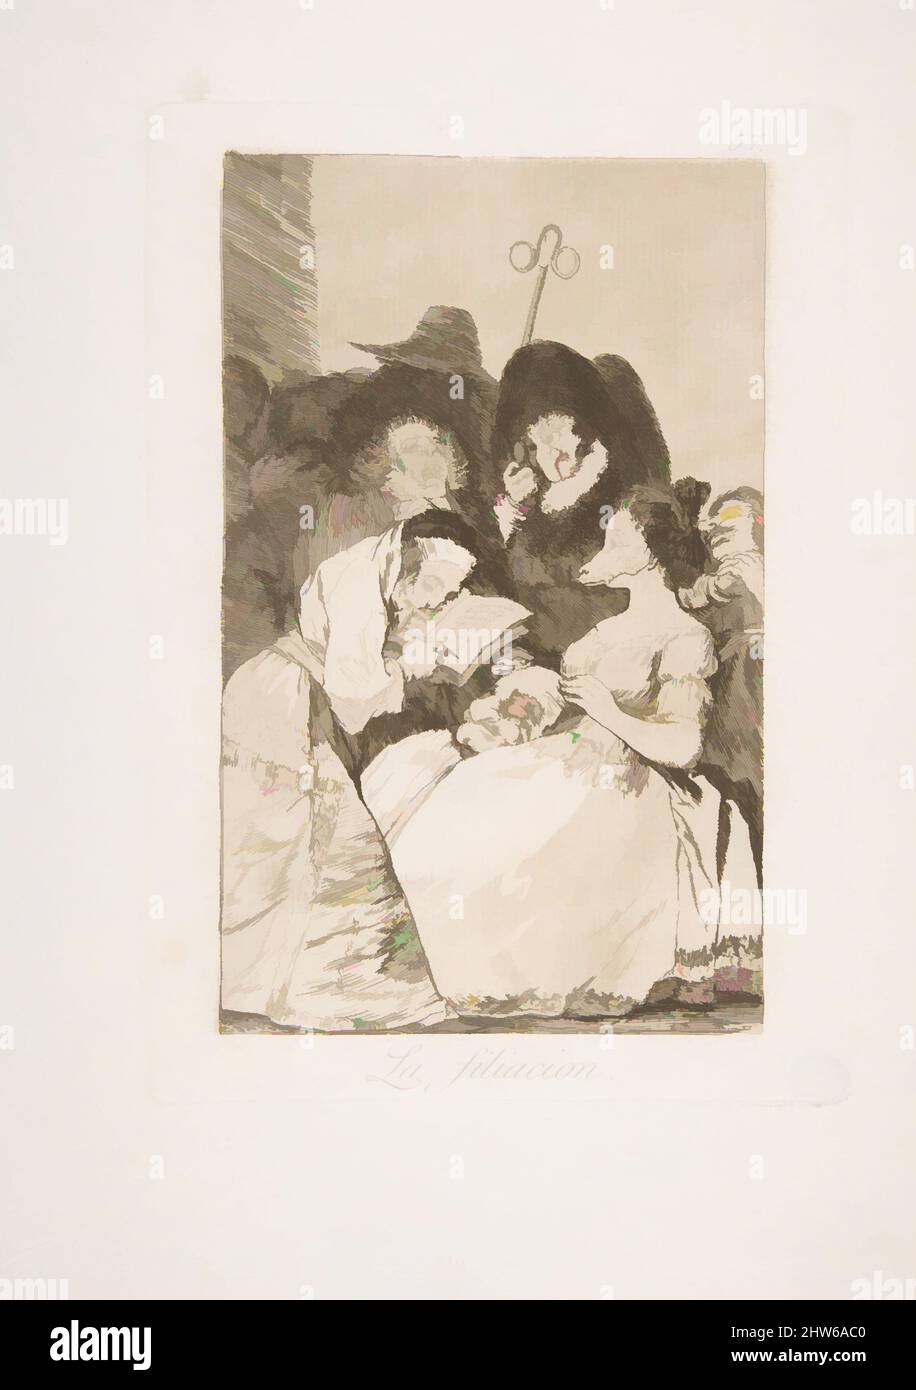 Art inspired by Plate 57 from 'Los Caprichos':The filiation (La filiacion.), 1799, Etching and aquatint, Plate: 8 7/16 x 5 7/8 in. (21.5 x 15 cm), Prints, Goya (Francisco de Goya y Lucientes) (Spanish, Fuendetodos 1746–1828 Bordeaux, Classic works modernized by Artotop with a splash of modernity. Shapes, color and value, eye-catching visual impact on art. Emotions through freedom of artworks in a contemporary way. A timeless message pursuing a wildly creative new direction. Artists turning to the digital medium and creating the Artotop NFT Stock Photo